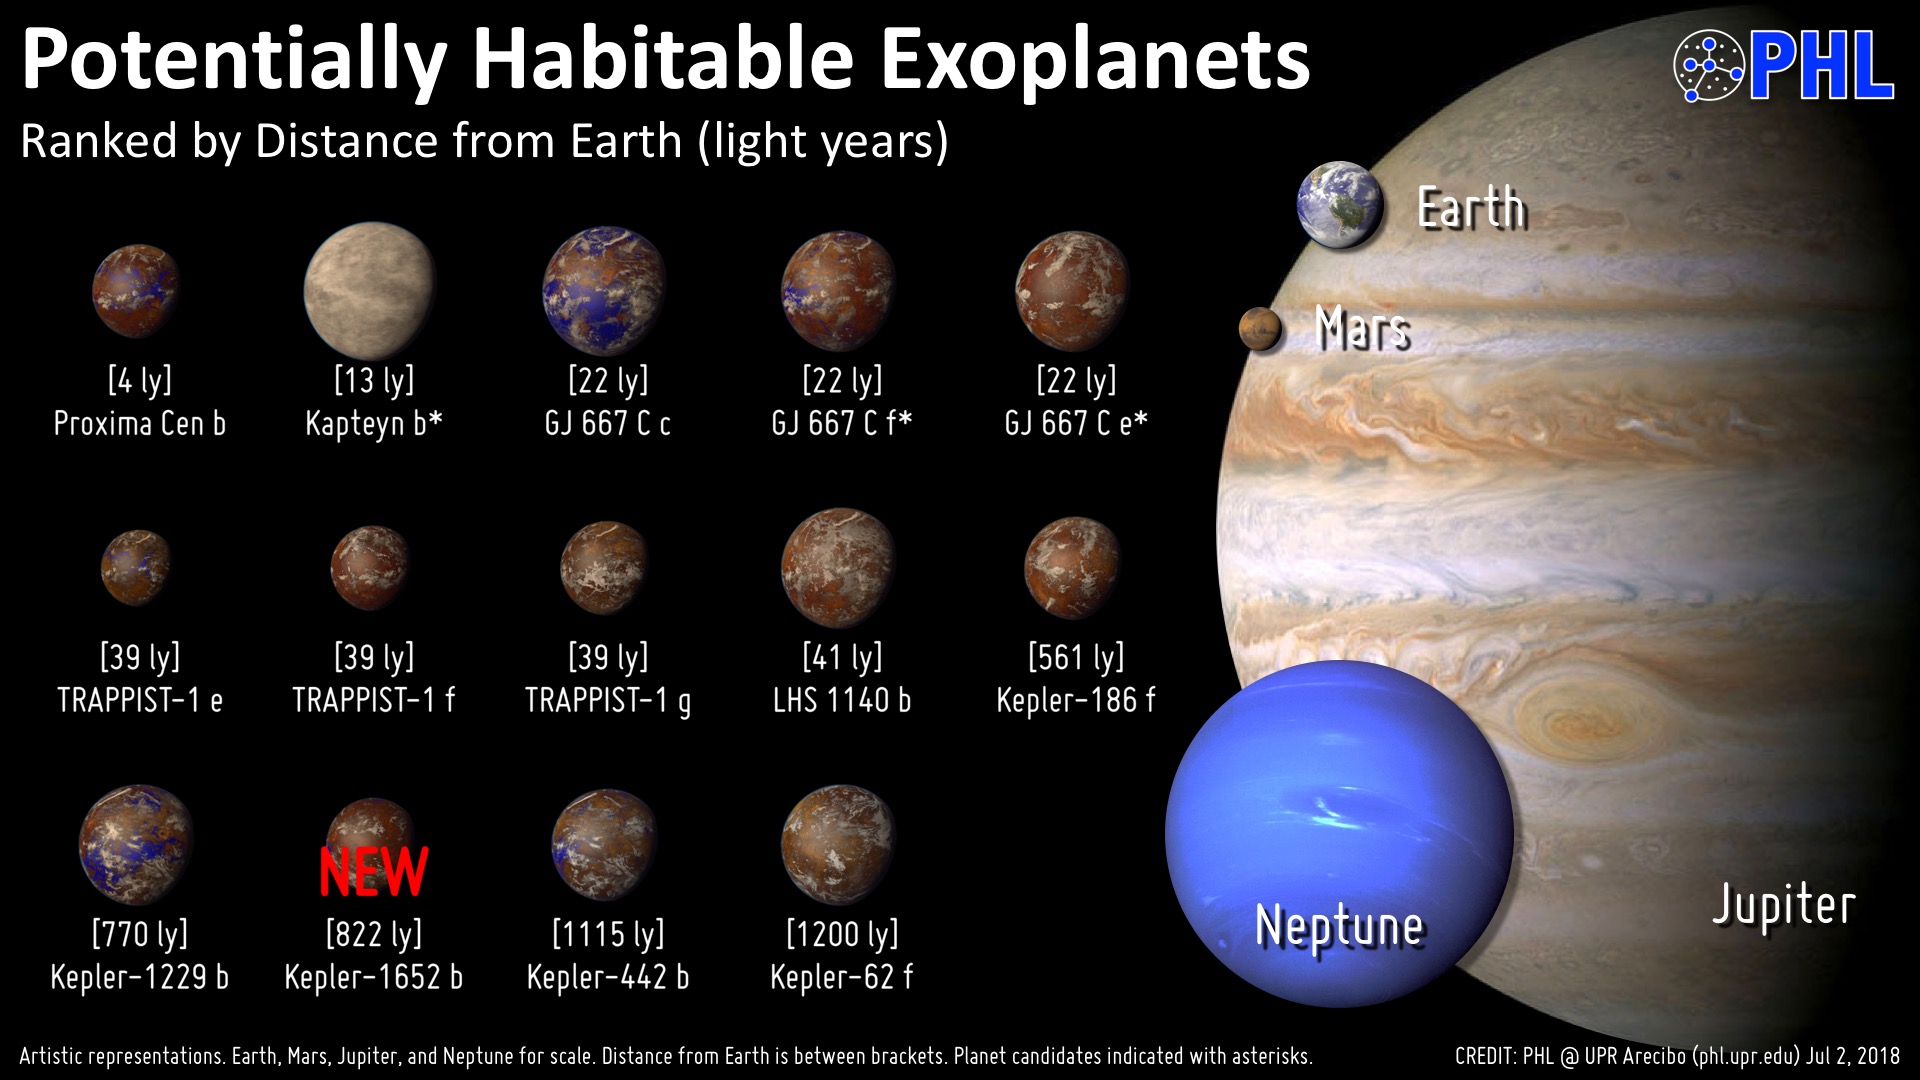 Two potentially habitable super-Earths found orbiting 